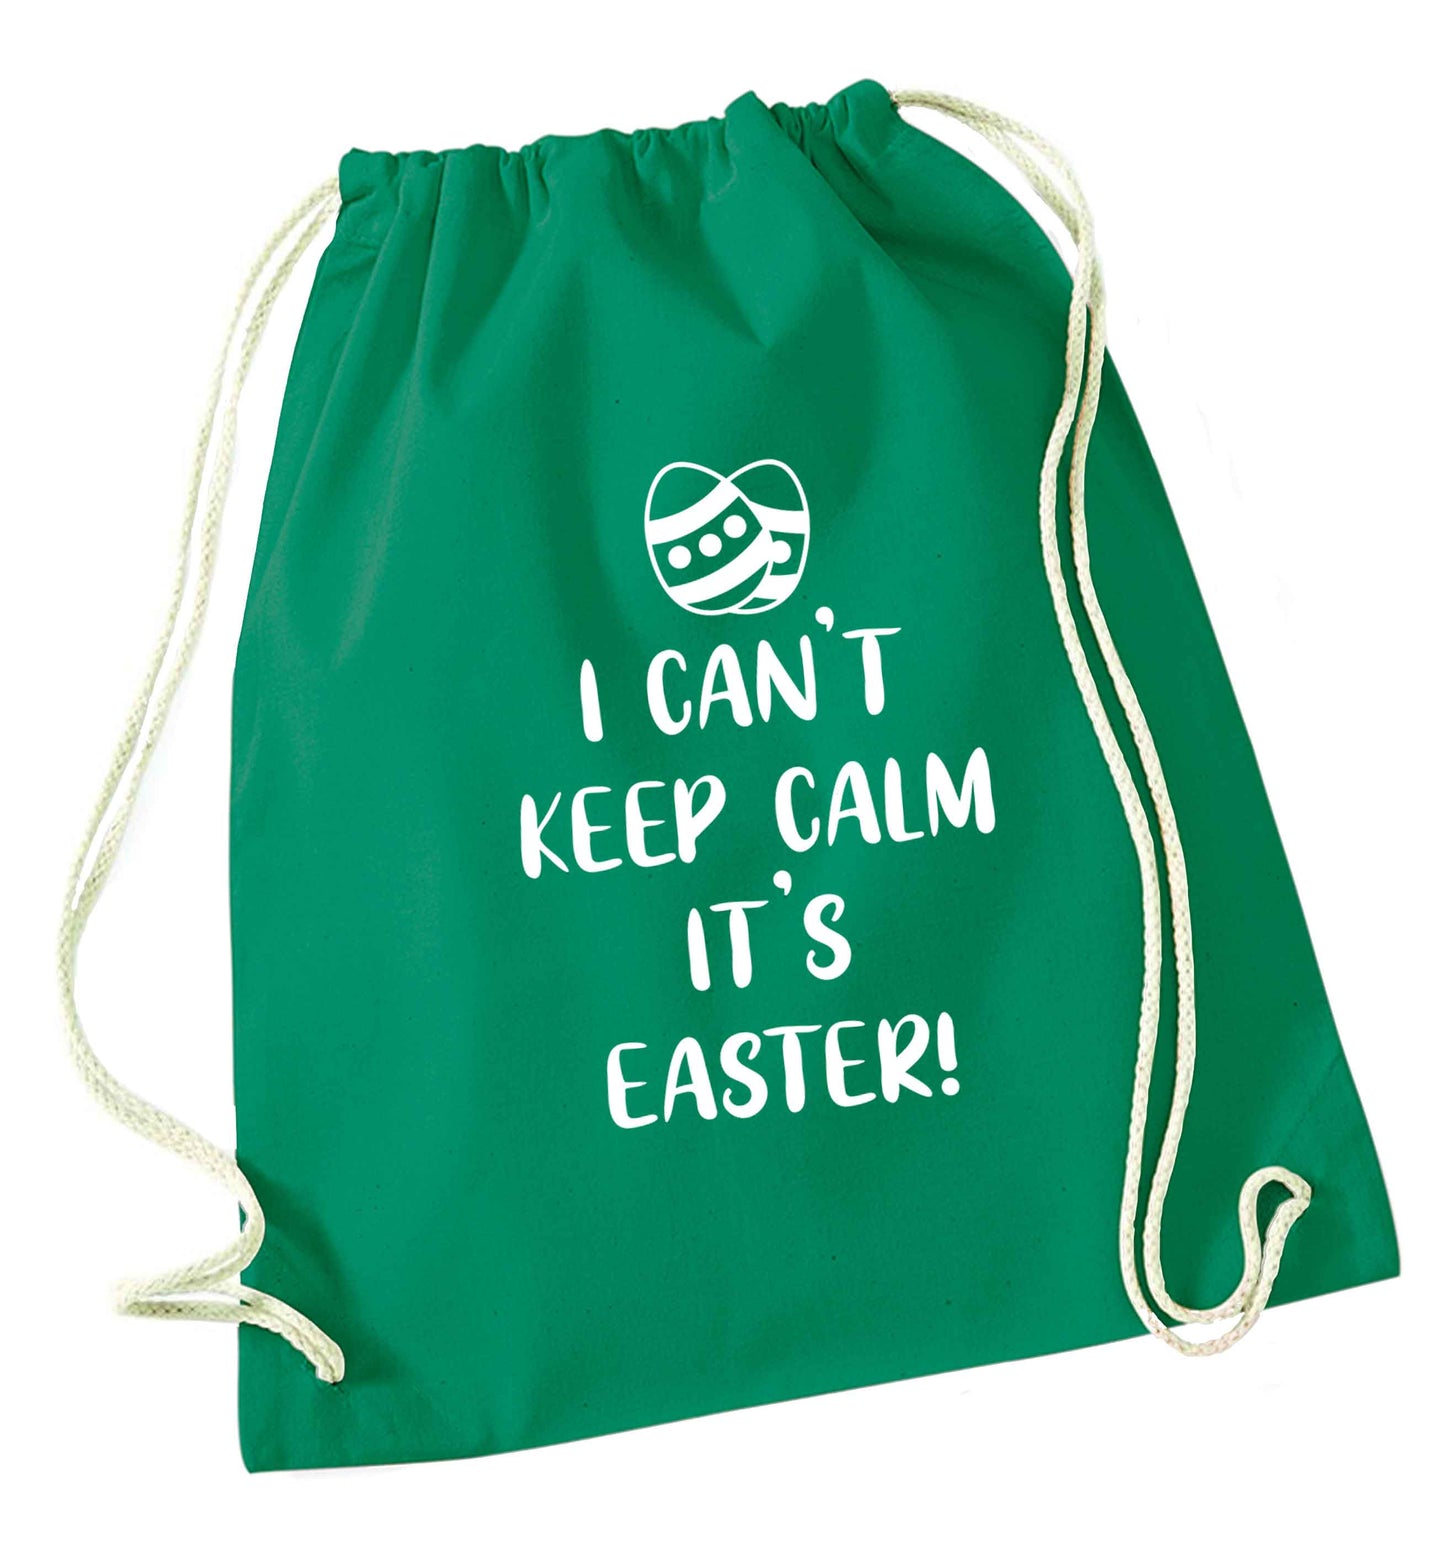 I can't keep calm it's Easter green drawstring bag